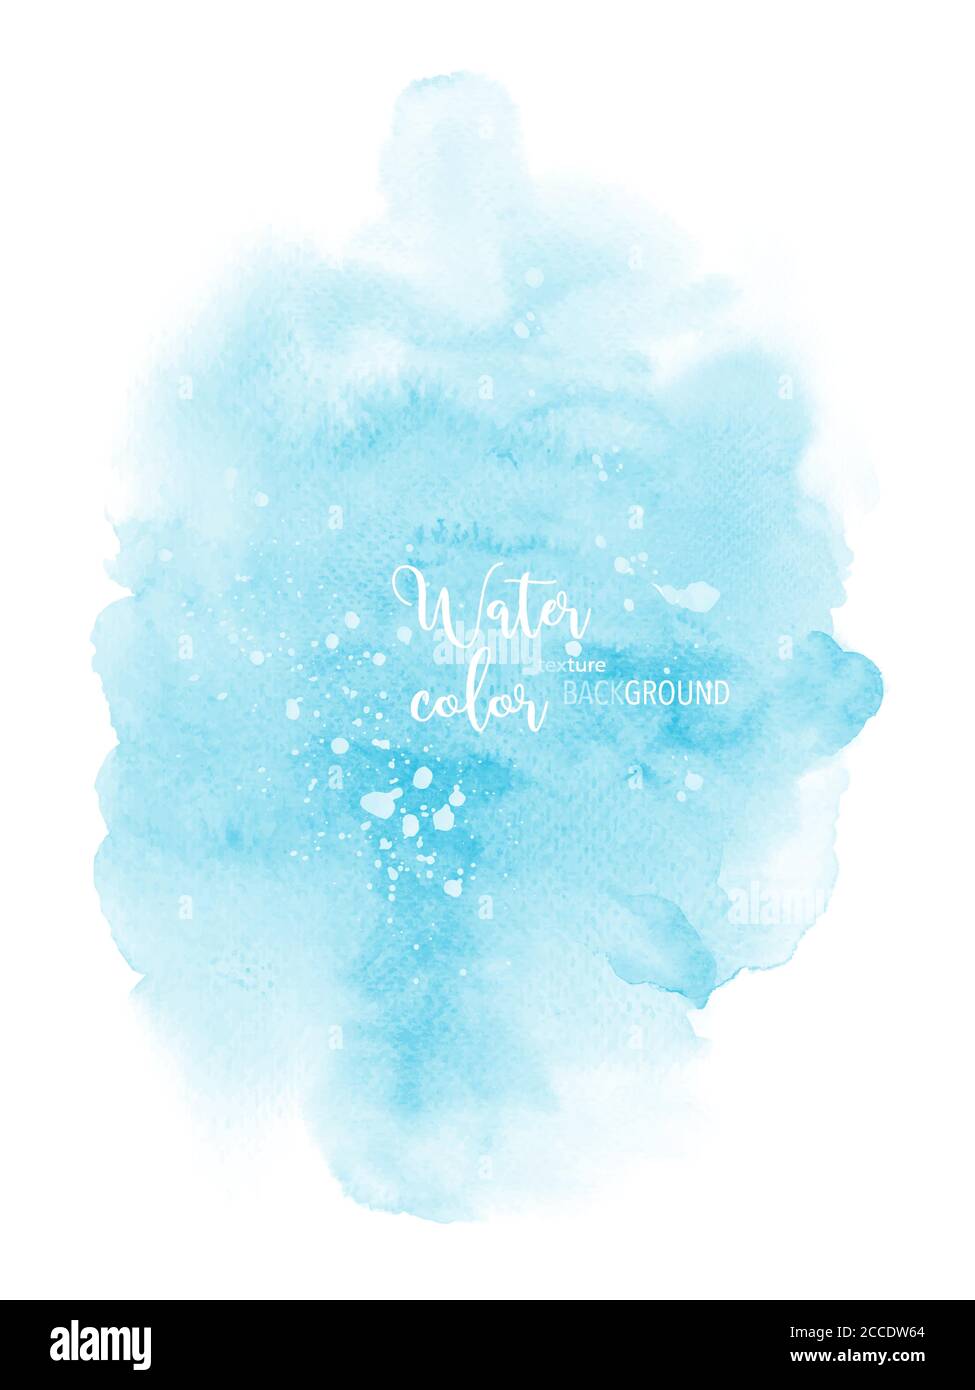 Light blue gradient hand-painted watercolor abstract background. Stain artistic vector used as being an element in the decorative design of header, po Stock Vector